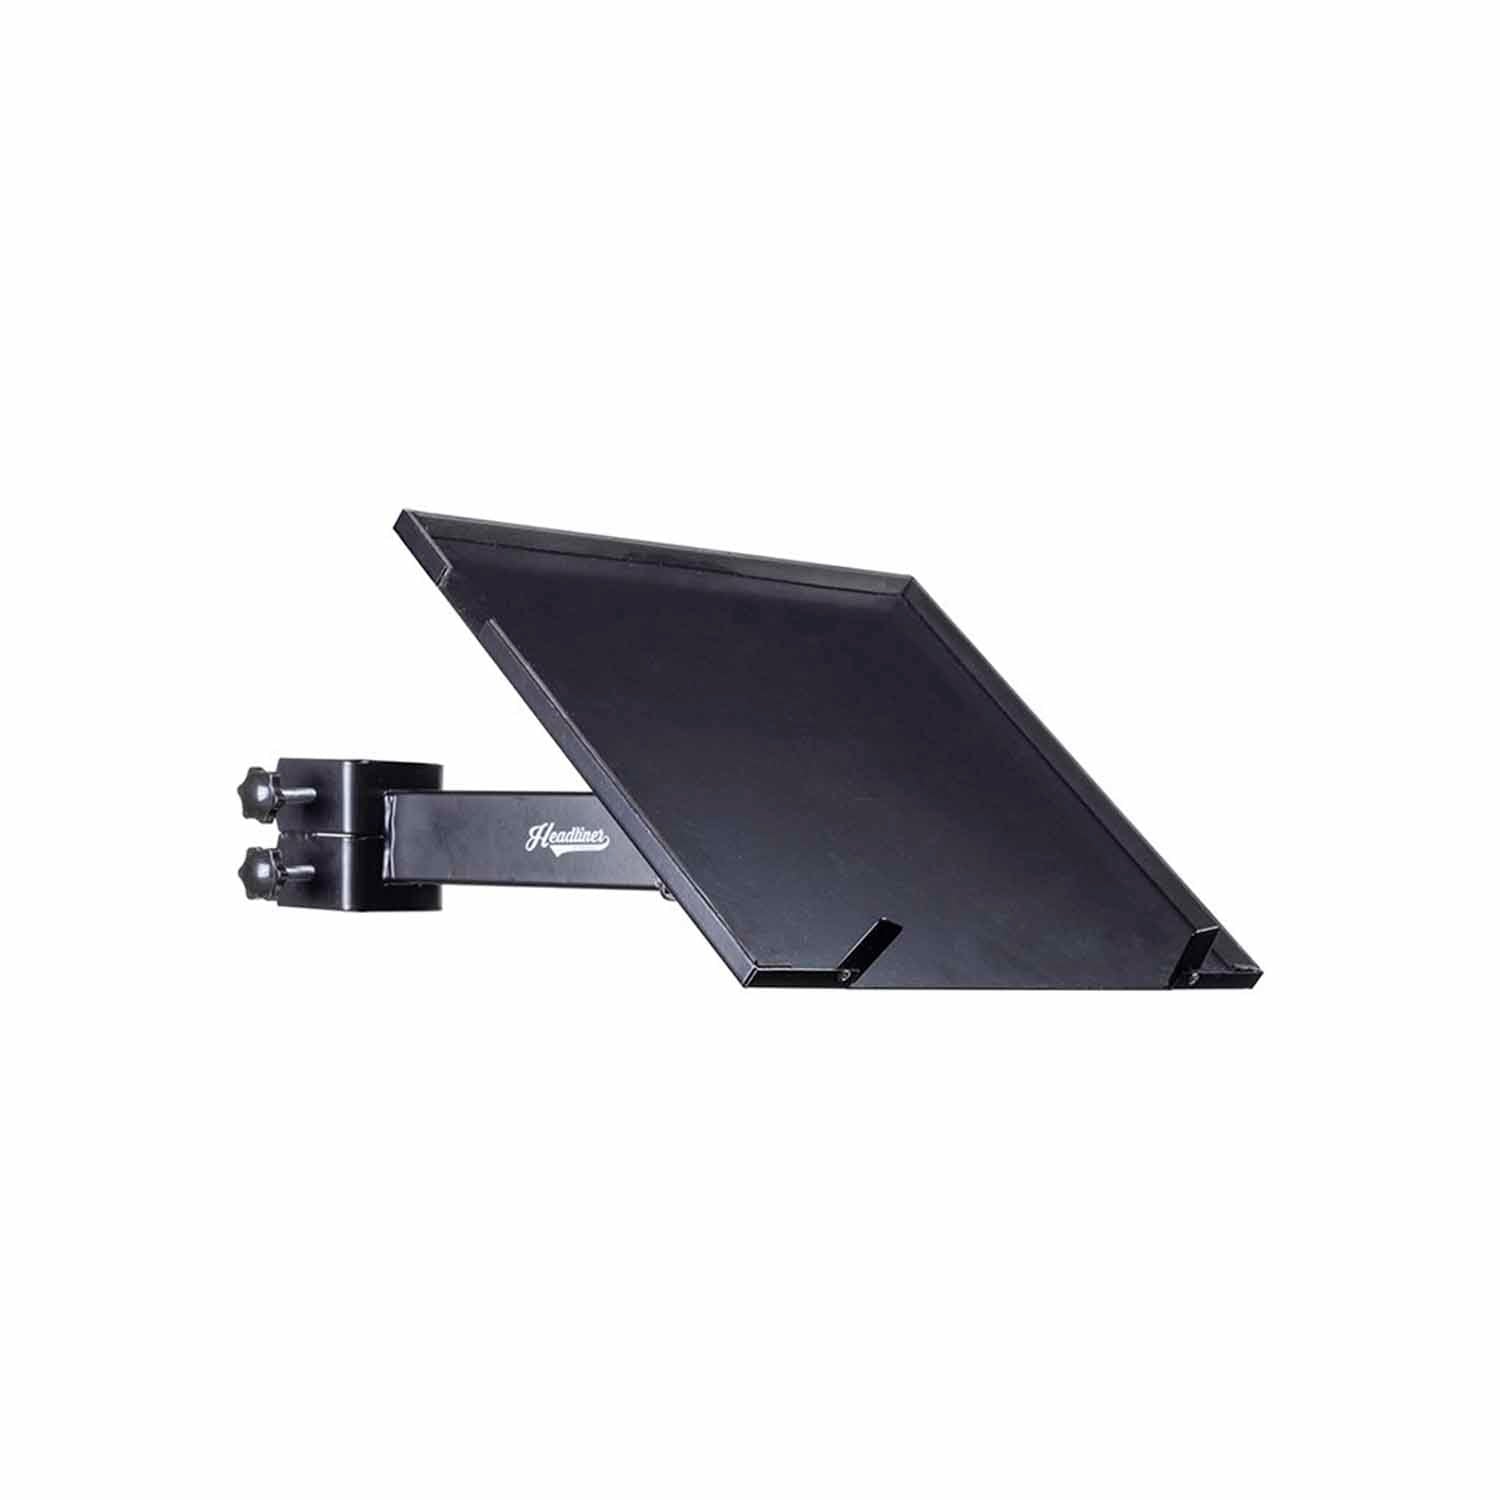 B-Stock: Headliner HL31000, Accessory Tray For Mic Stands, Speakers Stands and Lighting Bars Mount - Hollywood DJ